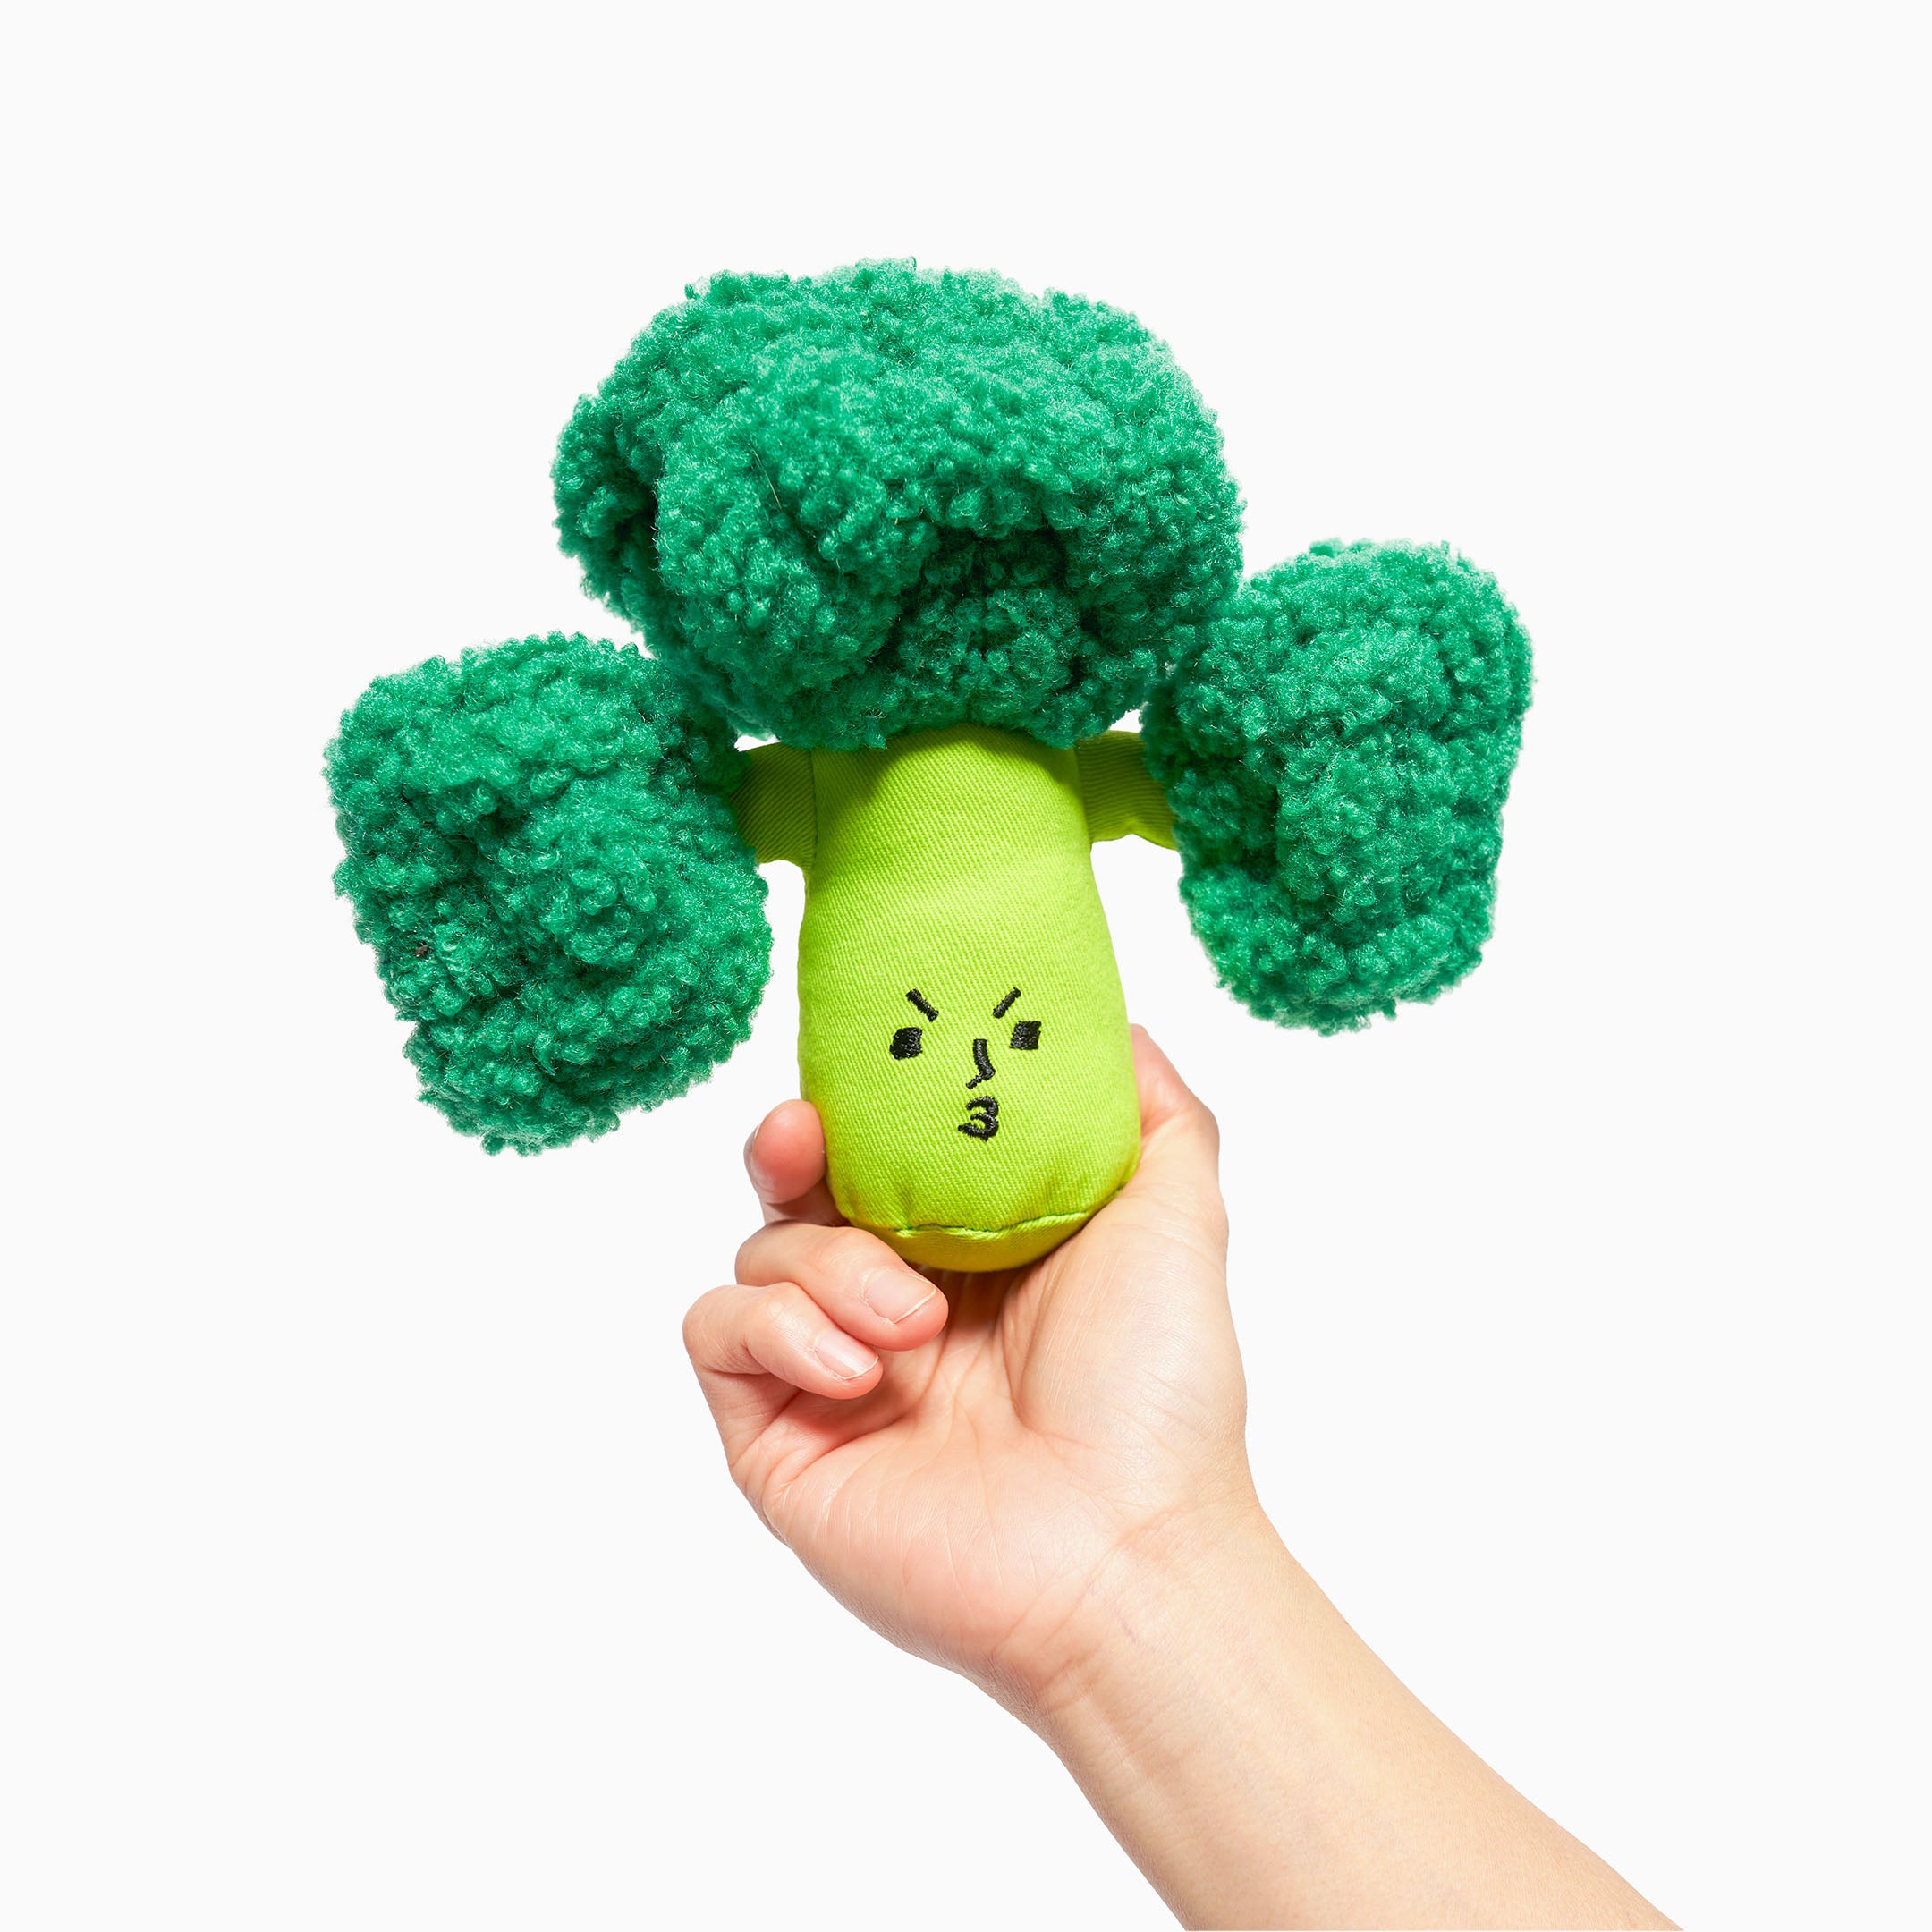 Hand holding a green broccoli-shaped dog toy with a cute face.